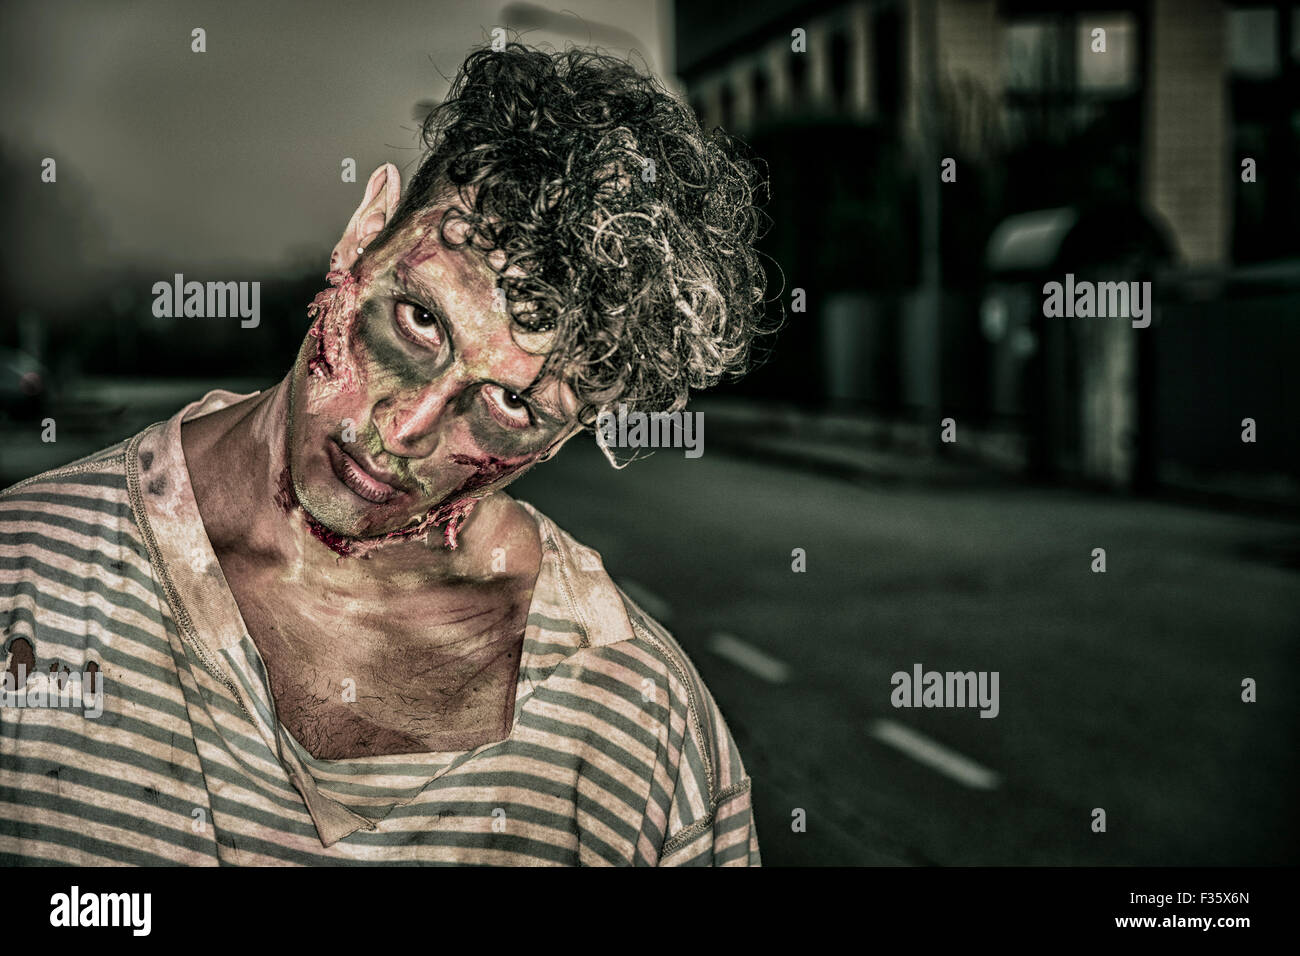 One male zombie standing in empty city street at night looking at camera. Halloween theme Stock Photo